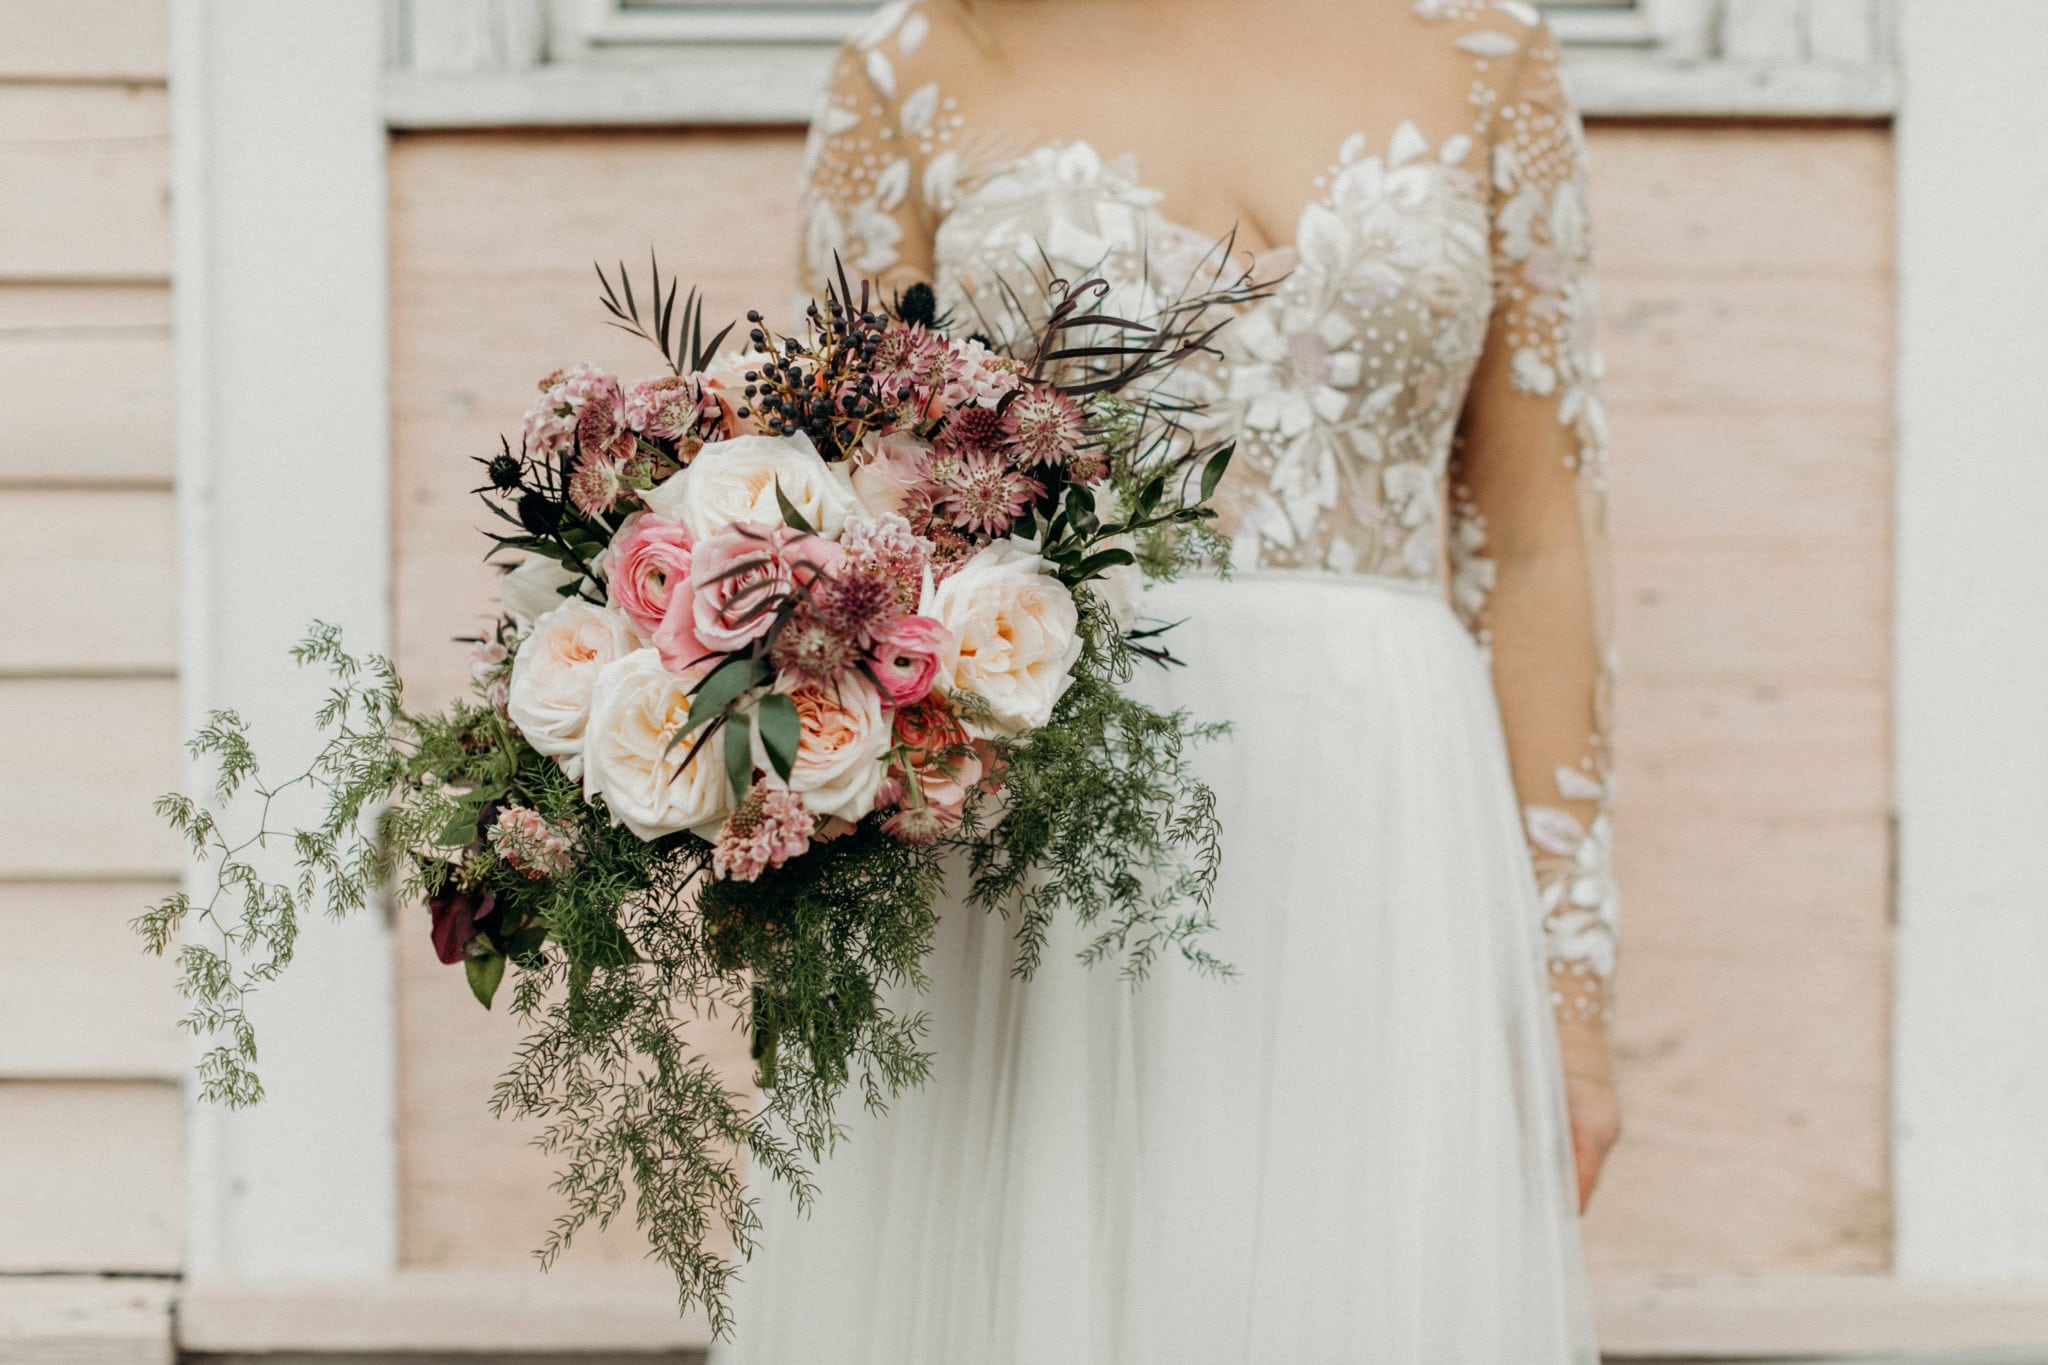 wild and asymmetric bridal bouquet with lots of movement and color palette to be pale pink mauve and green with touches of black flowers of scabiosa, ranunculus, roses, ruscus, thistle, and seasonal blooms and greenery for winter wedding in new orleans french quarter by kim starr wise wedding and event florist